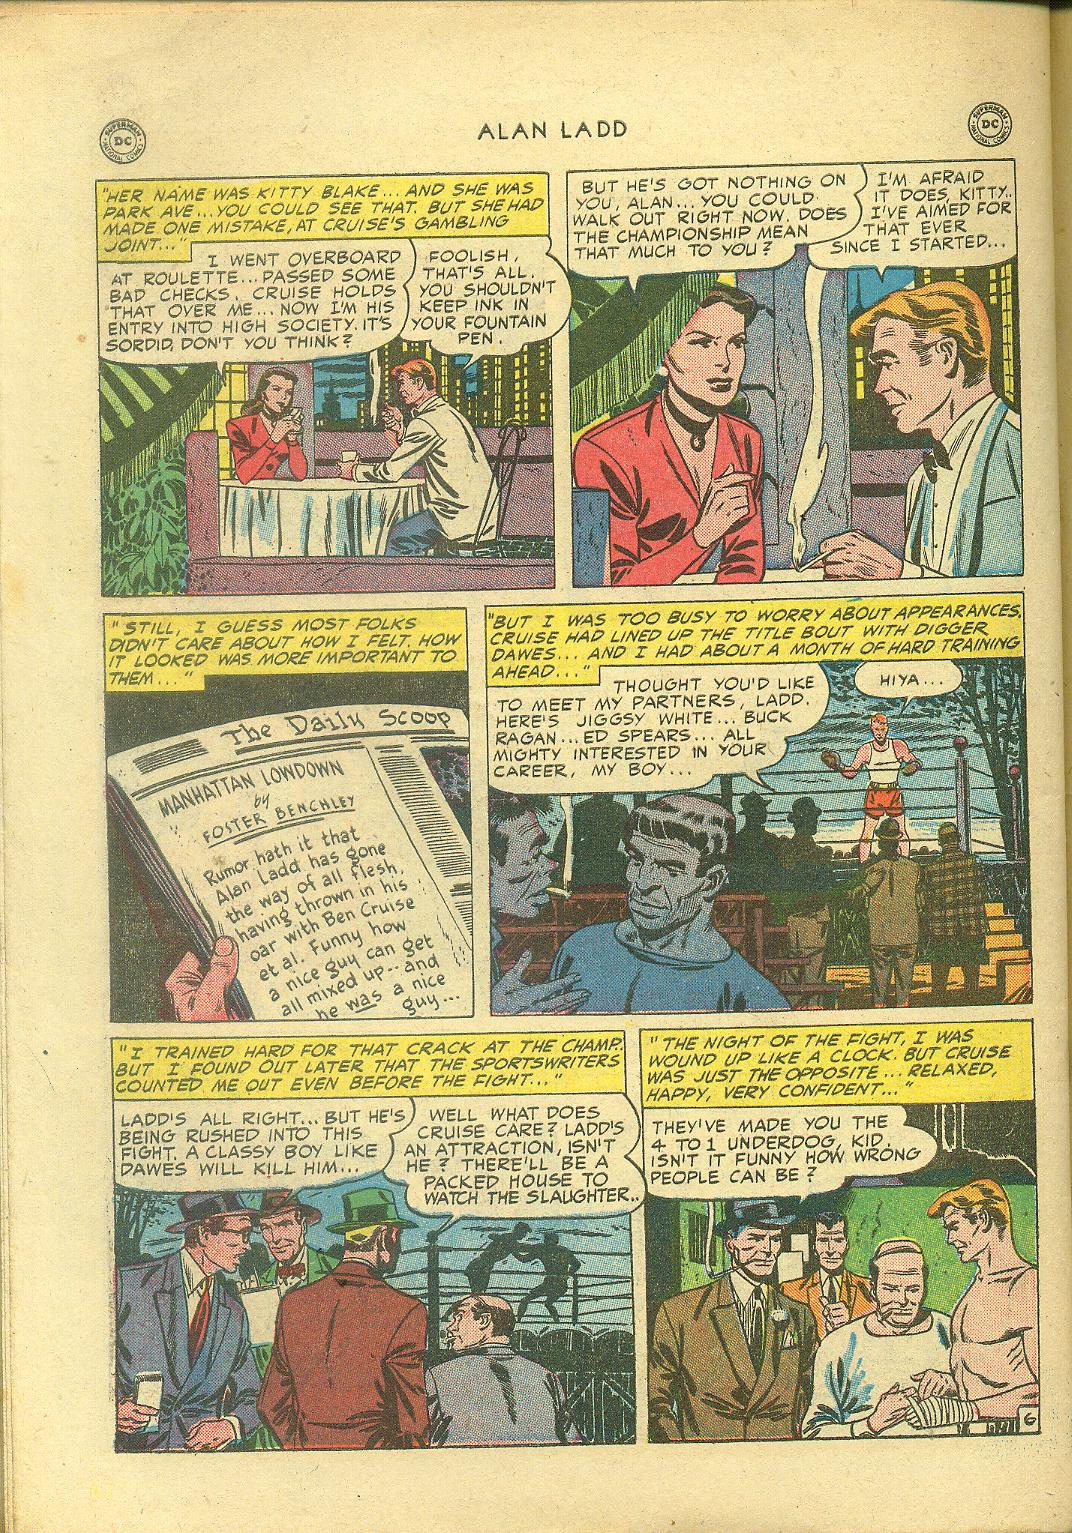 Read online Adventures of Alan Ladd comic -  Issue #2 - 44